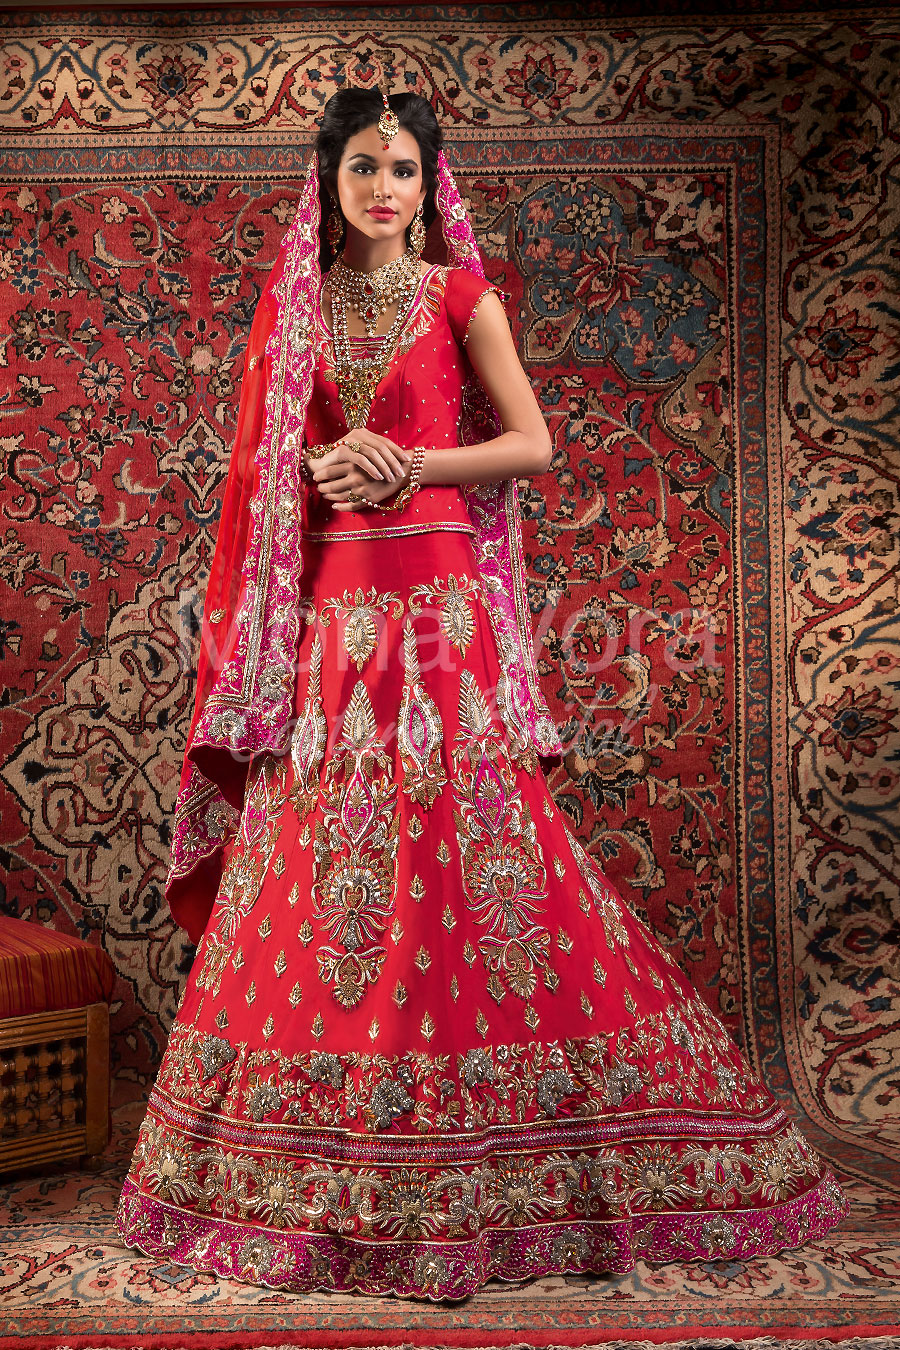 Amazing Wedding Dress For Womens In India of the decade The ultimate guide 